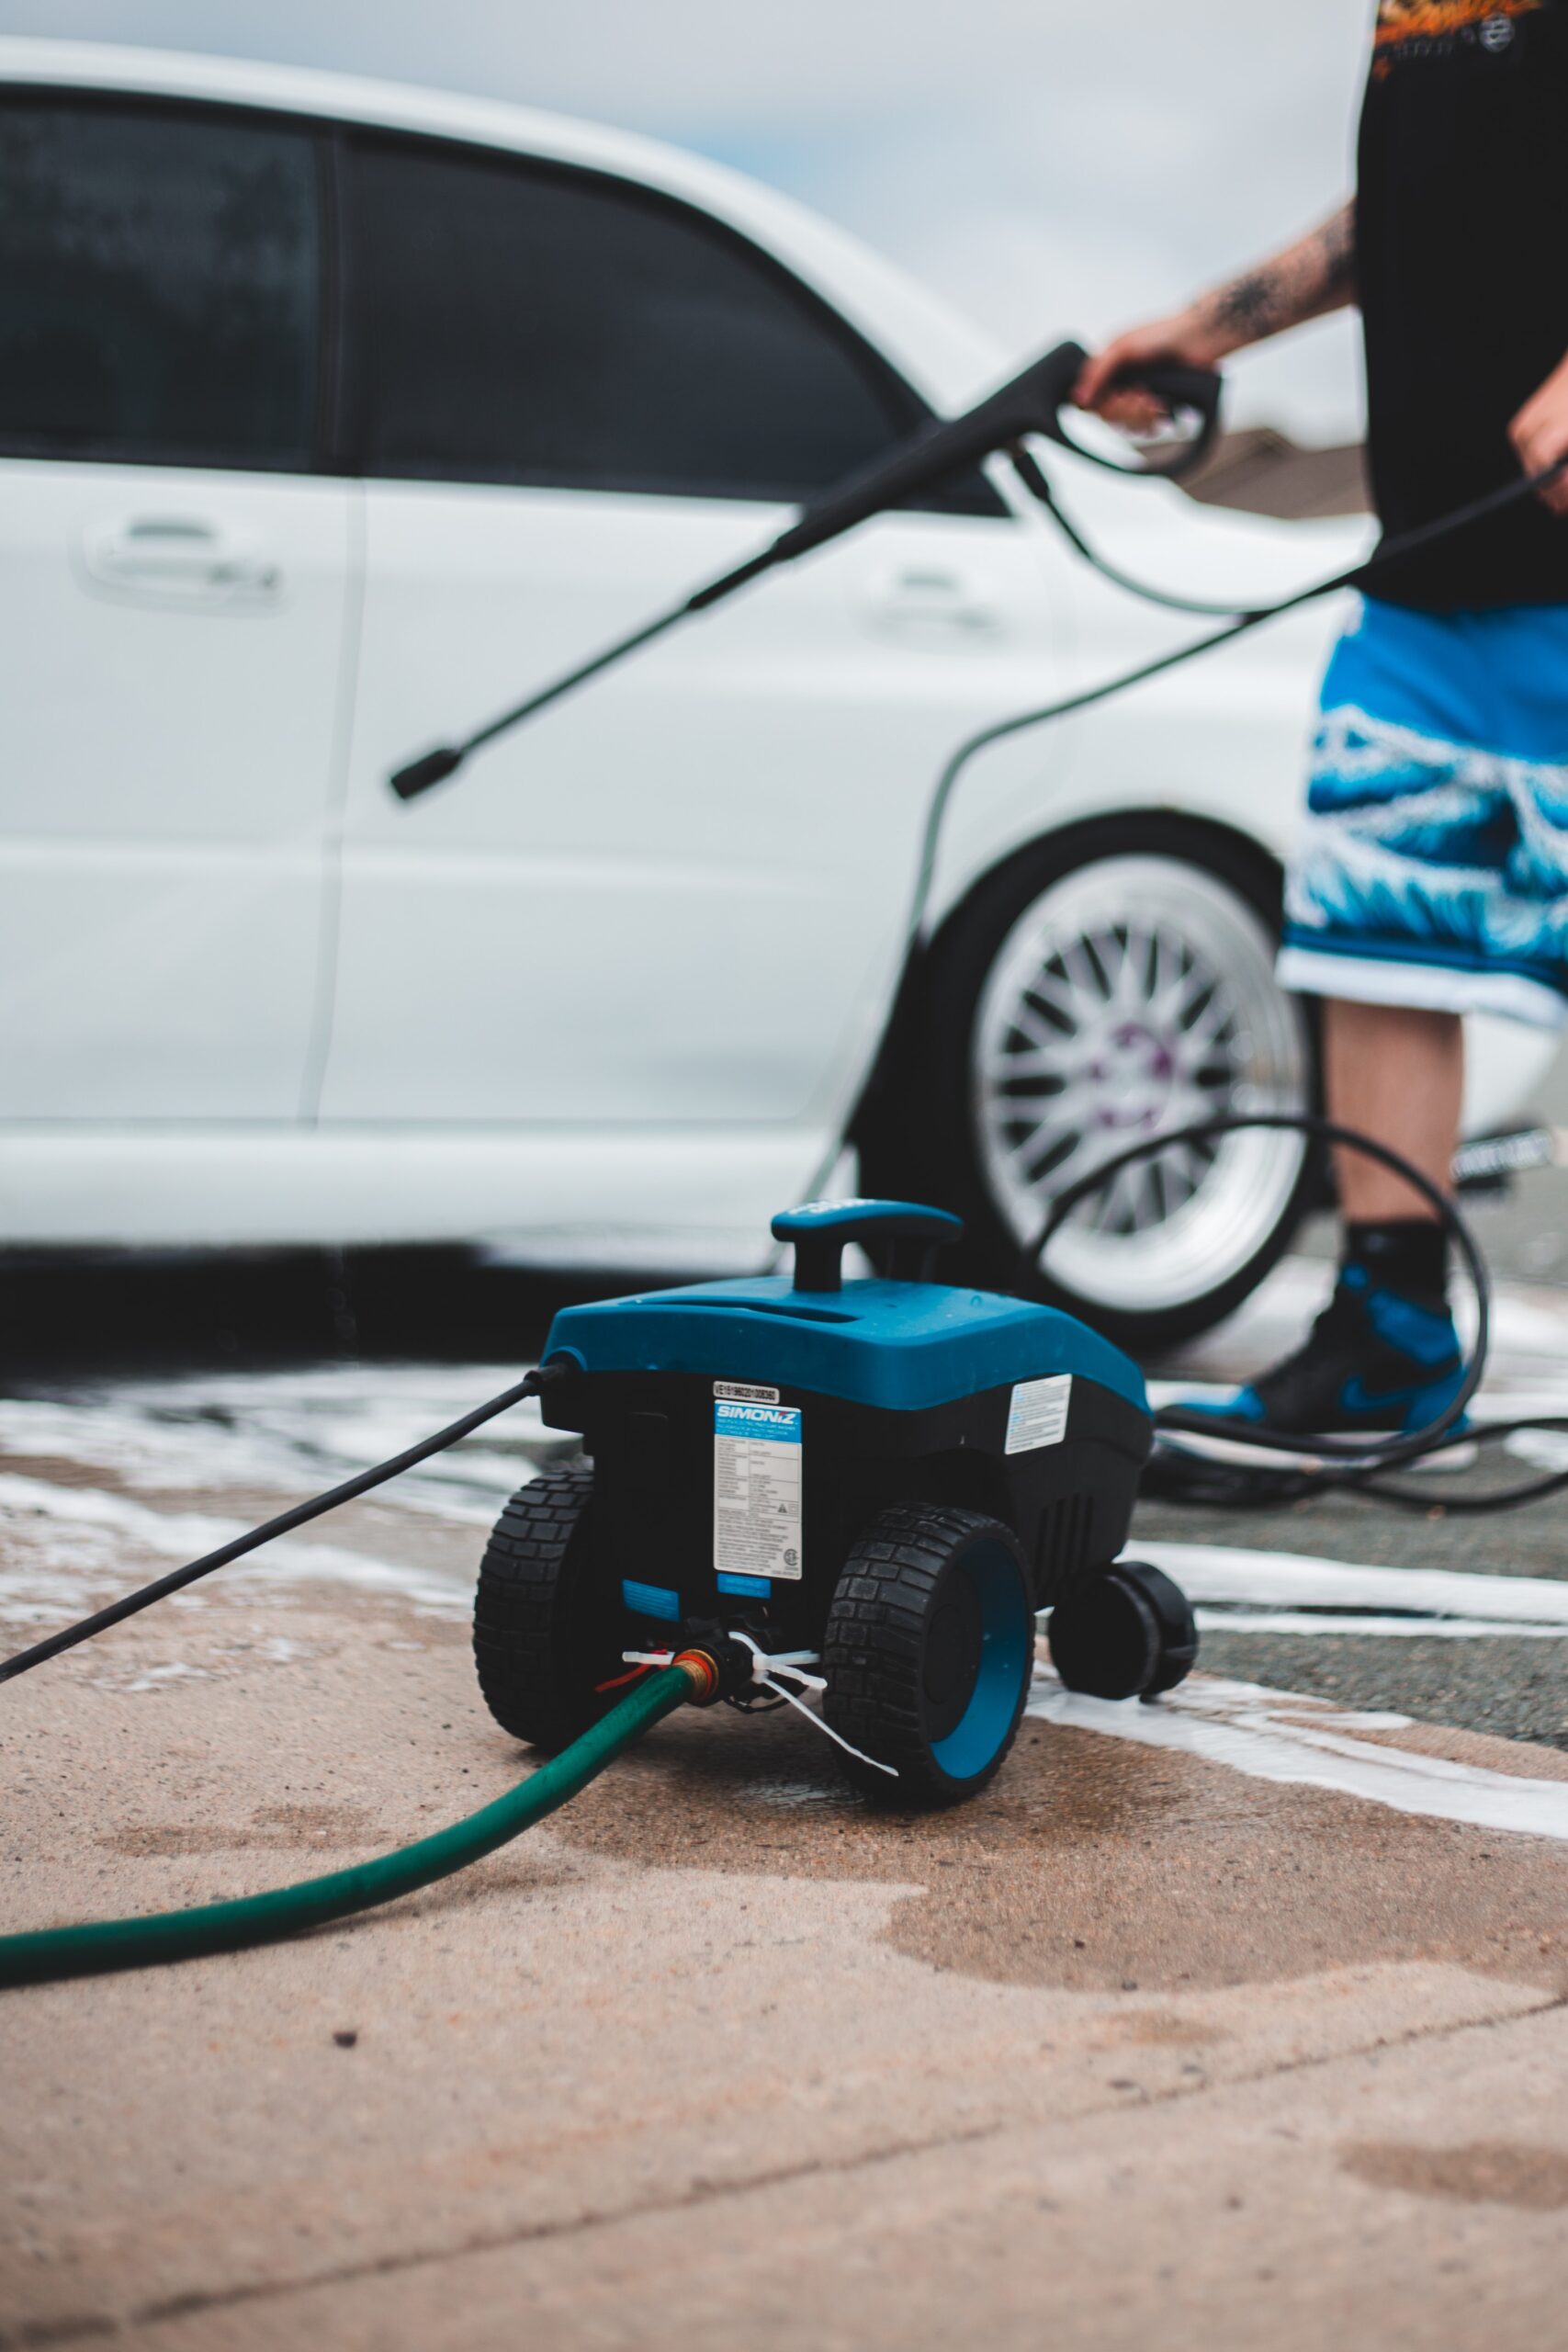 Benefits of Investing in a Car Pressure Washer for DIY Car Care